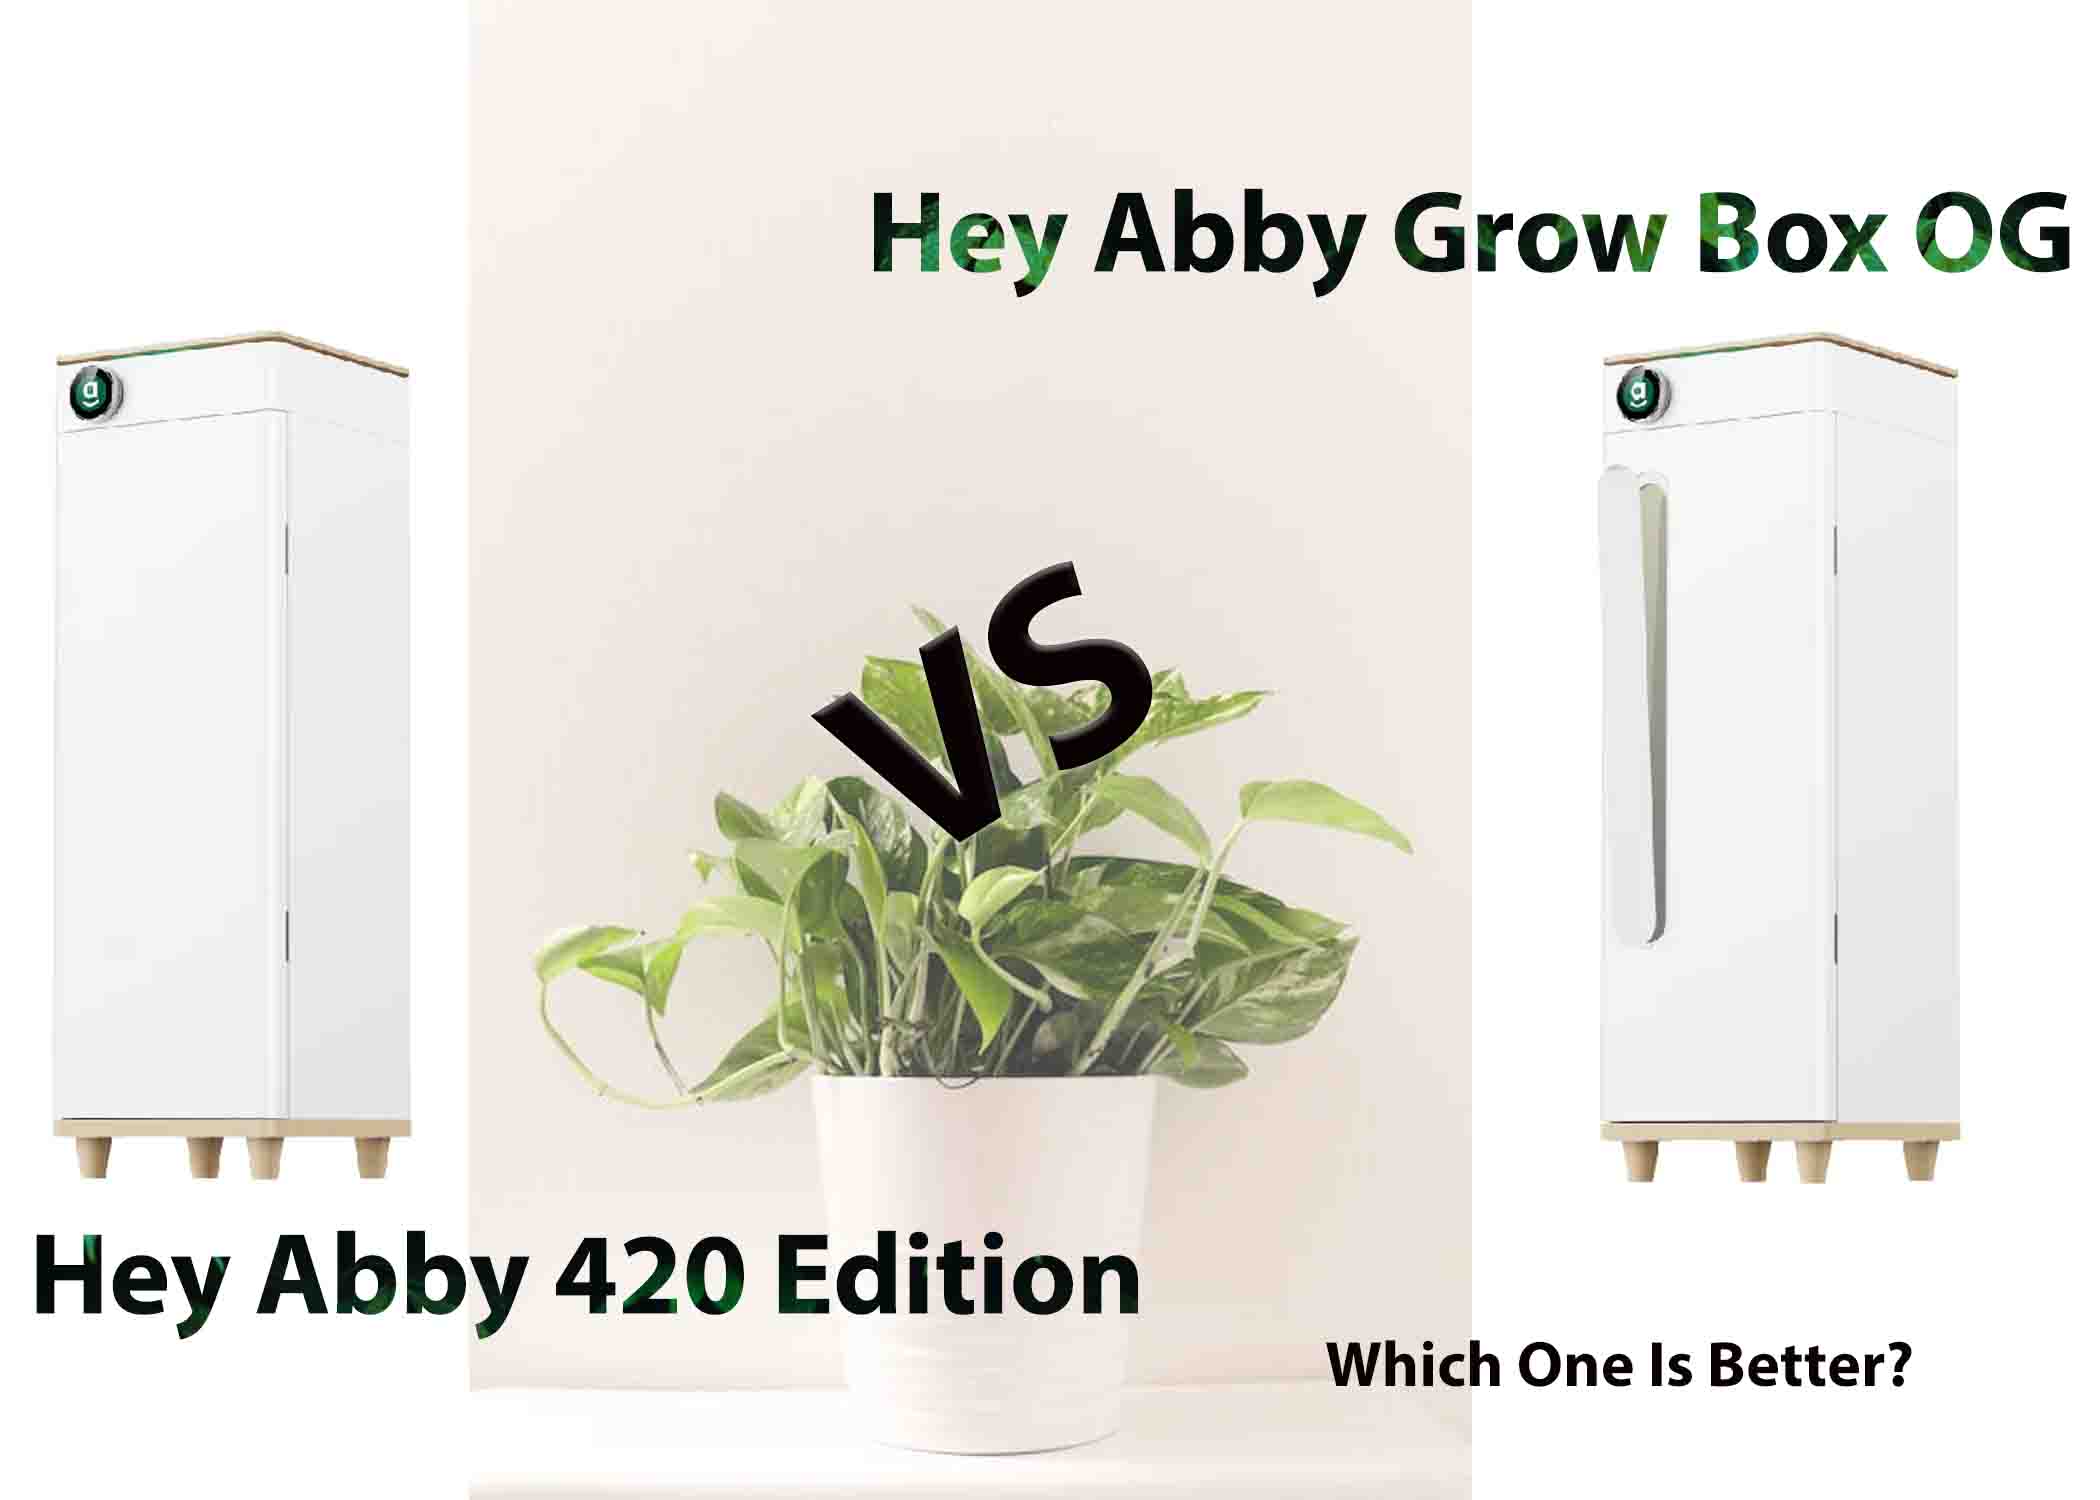 Hey Abby 420 Edition vs. Grow Box OG: Which Is Right for You?